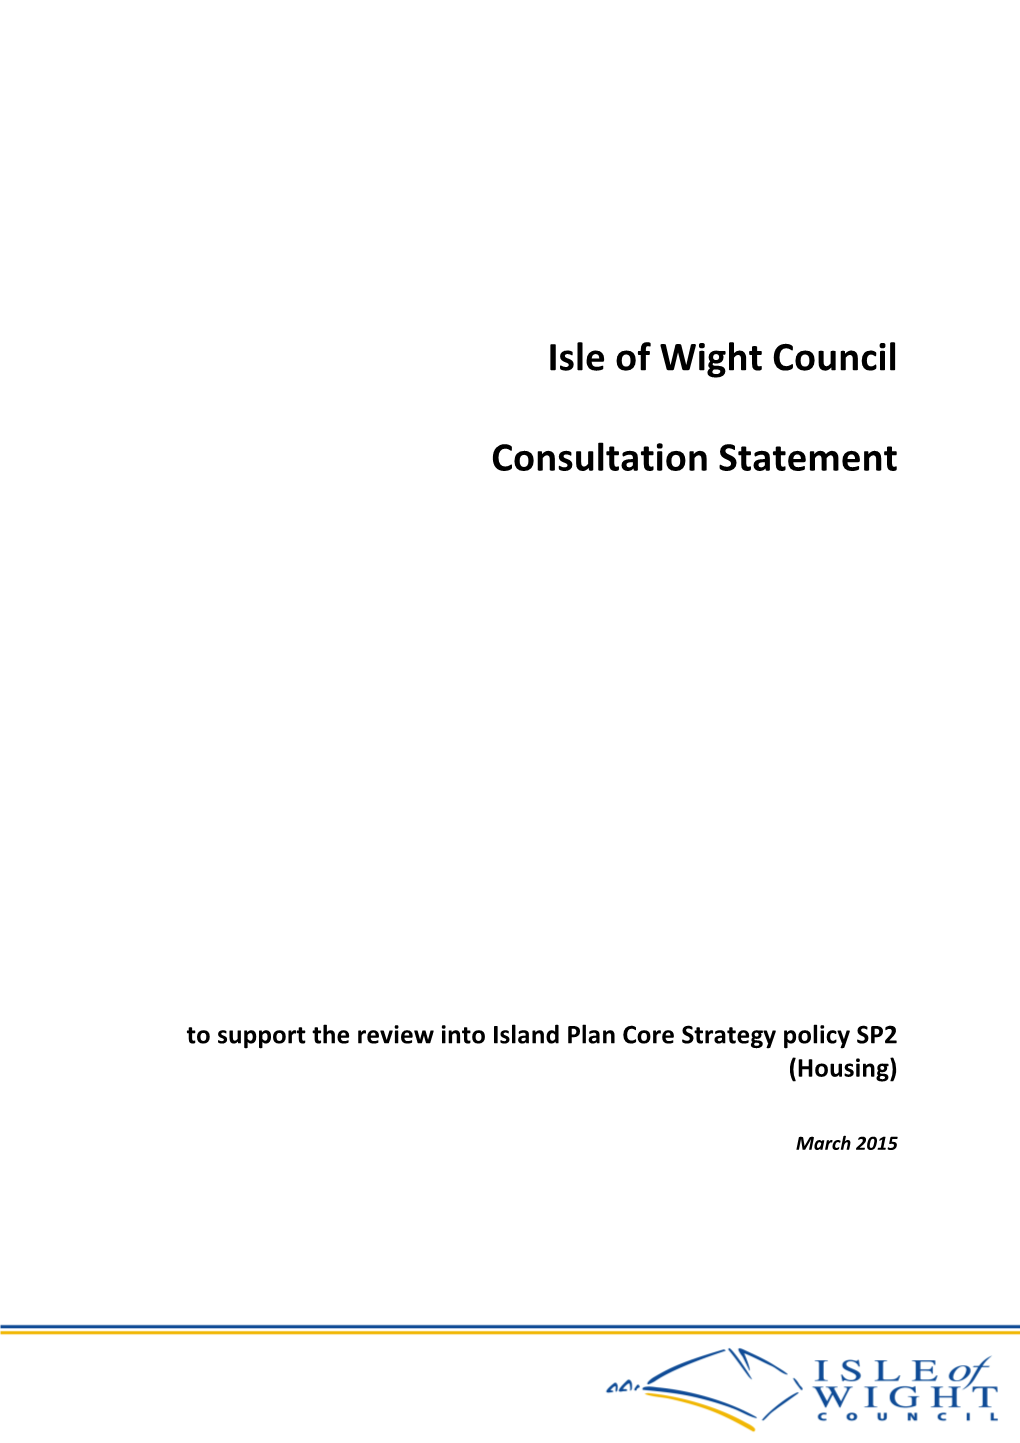 Isle of Wight Council Consultation Statement